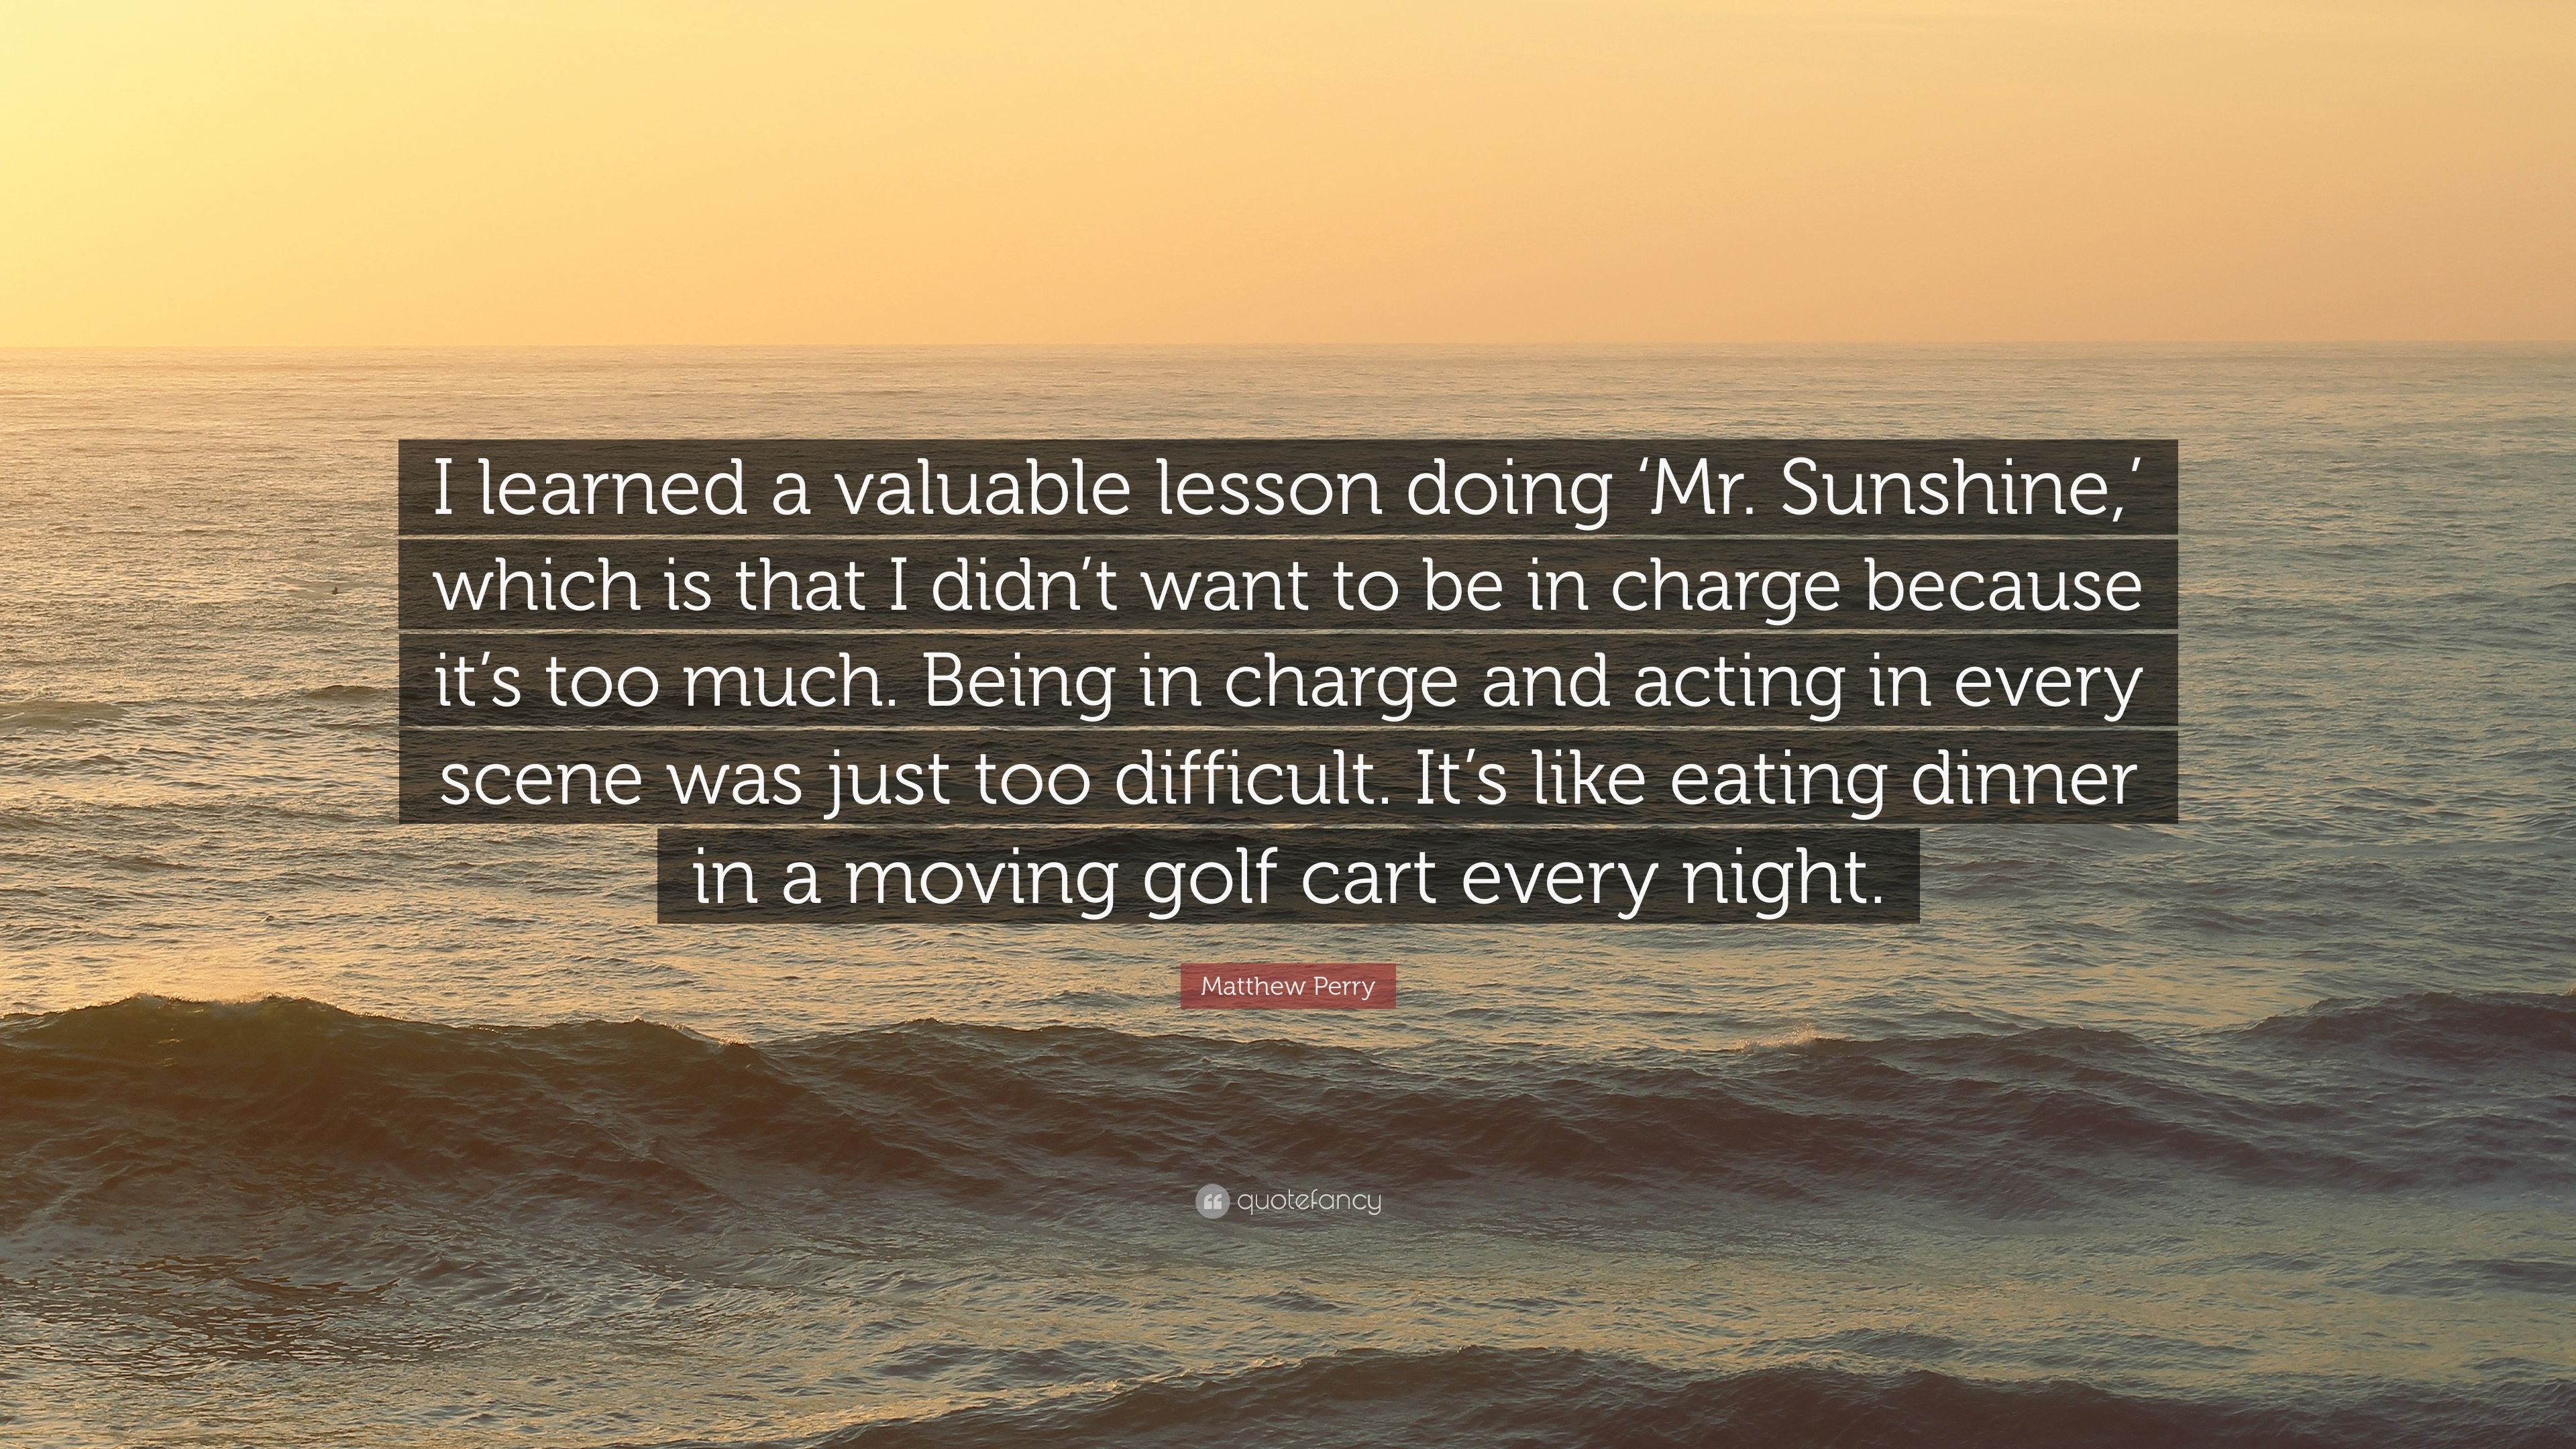 Matthew Perry Quote: “I learned a valuable lesson doing 'Mr